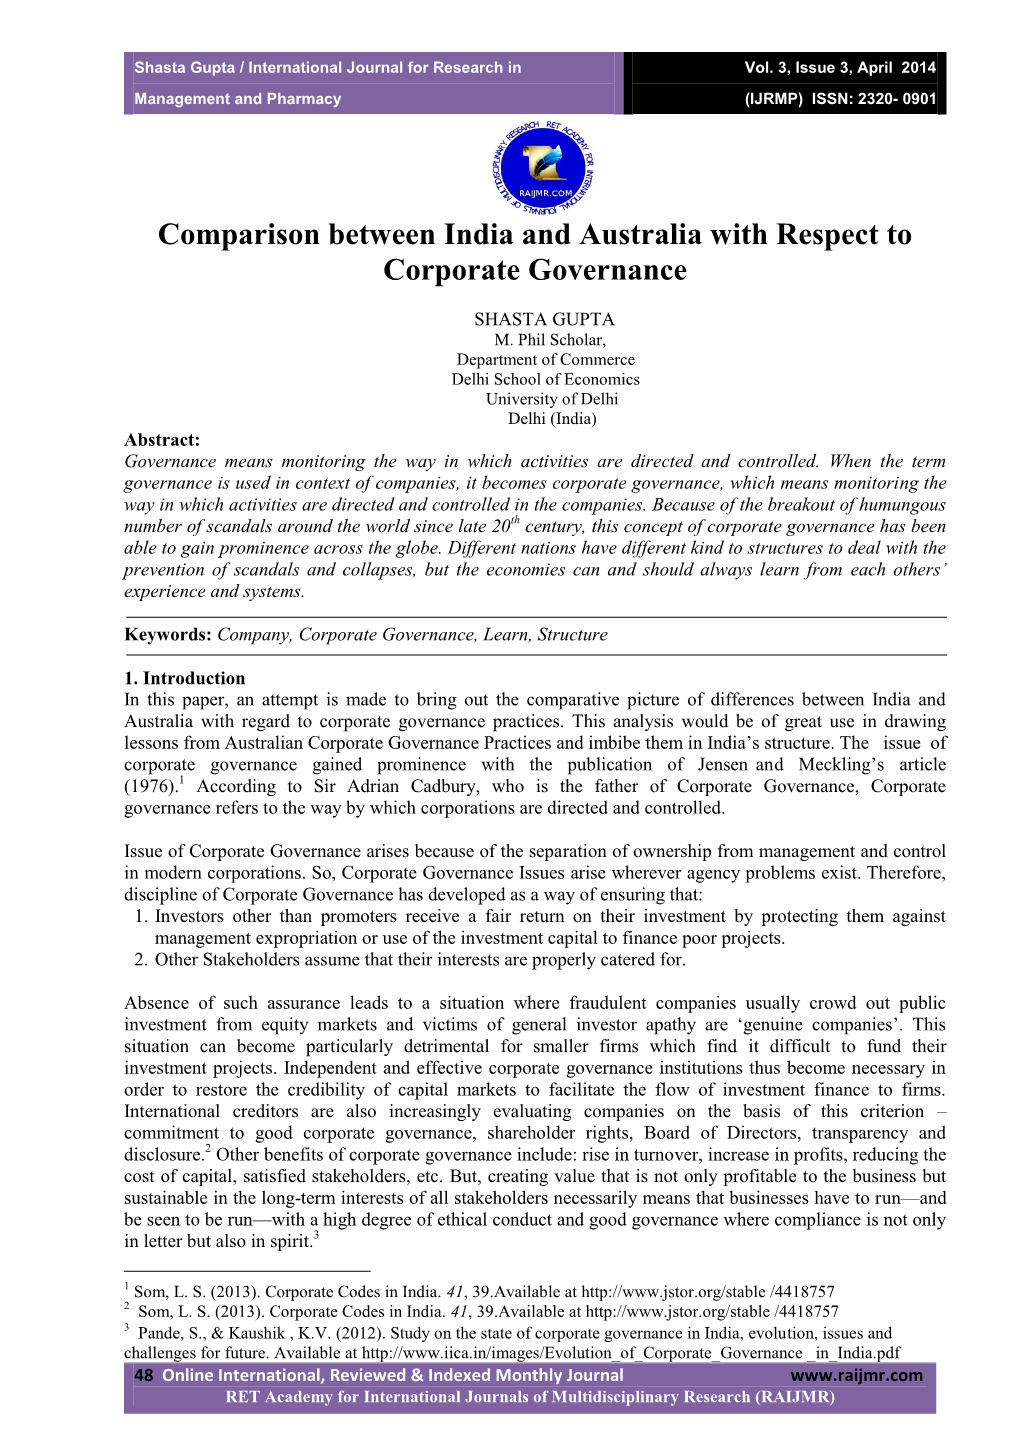 Comparison Between India and Australia with Respect to Corporate Governance